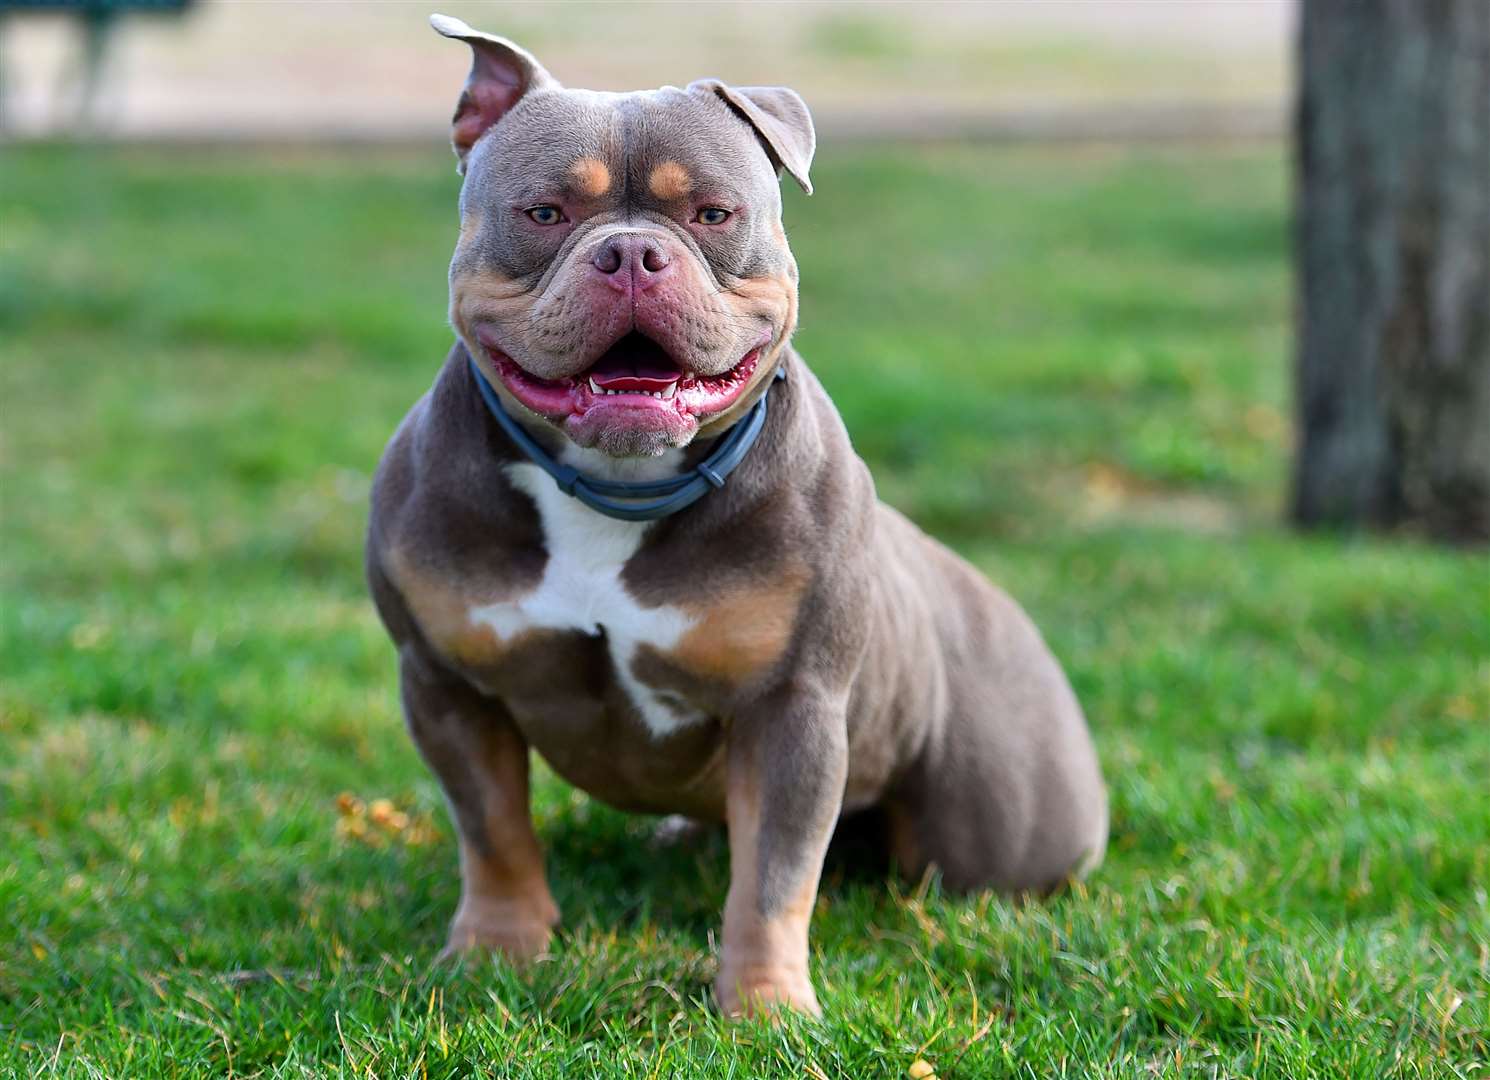 Animal charities say breed specific ban lists are not the answer. Image: iStock.